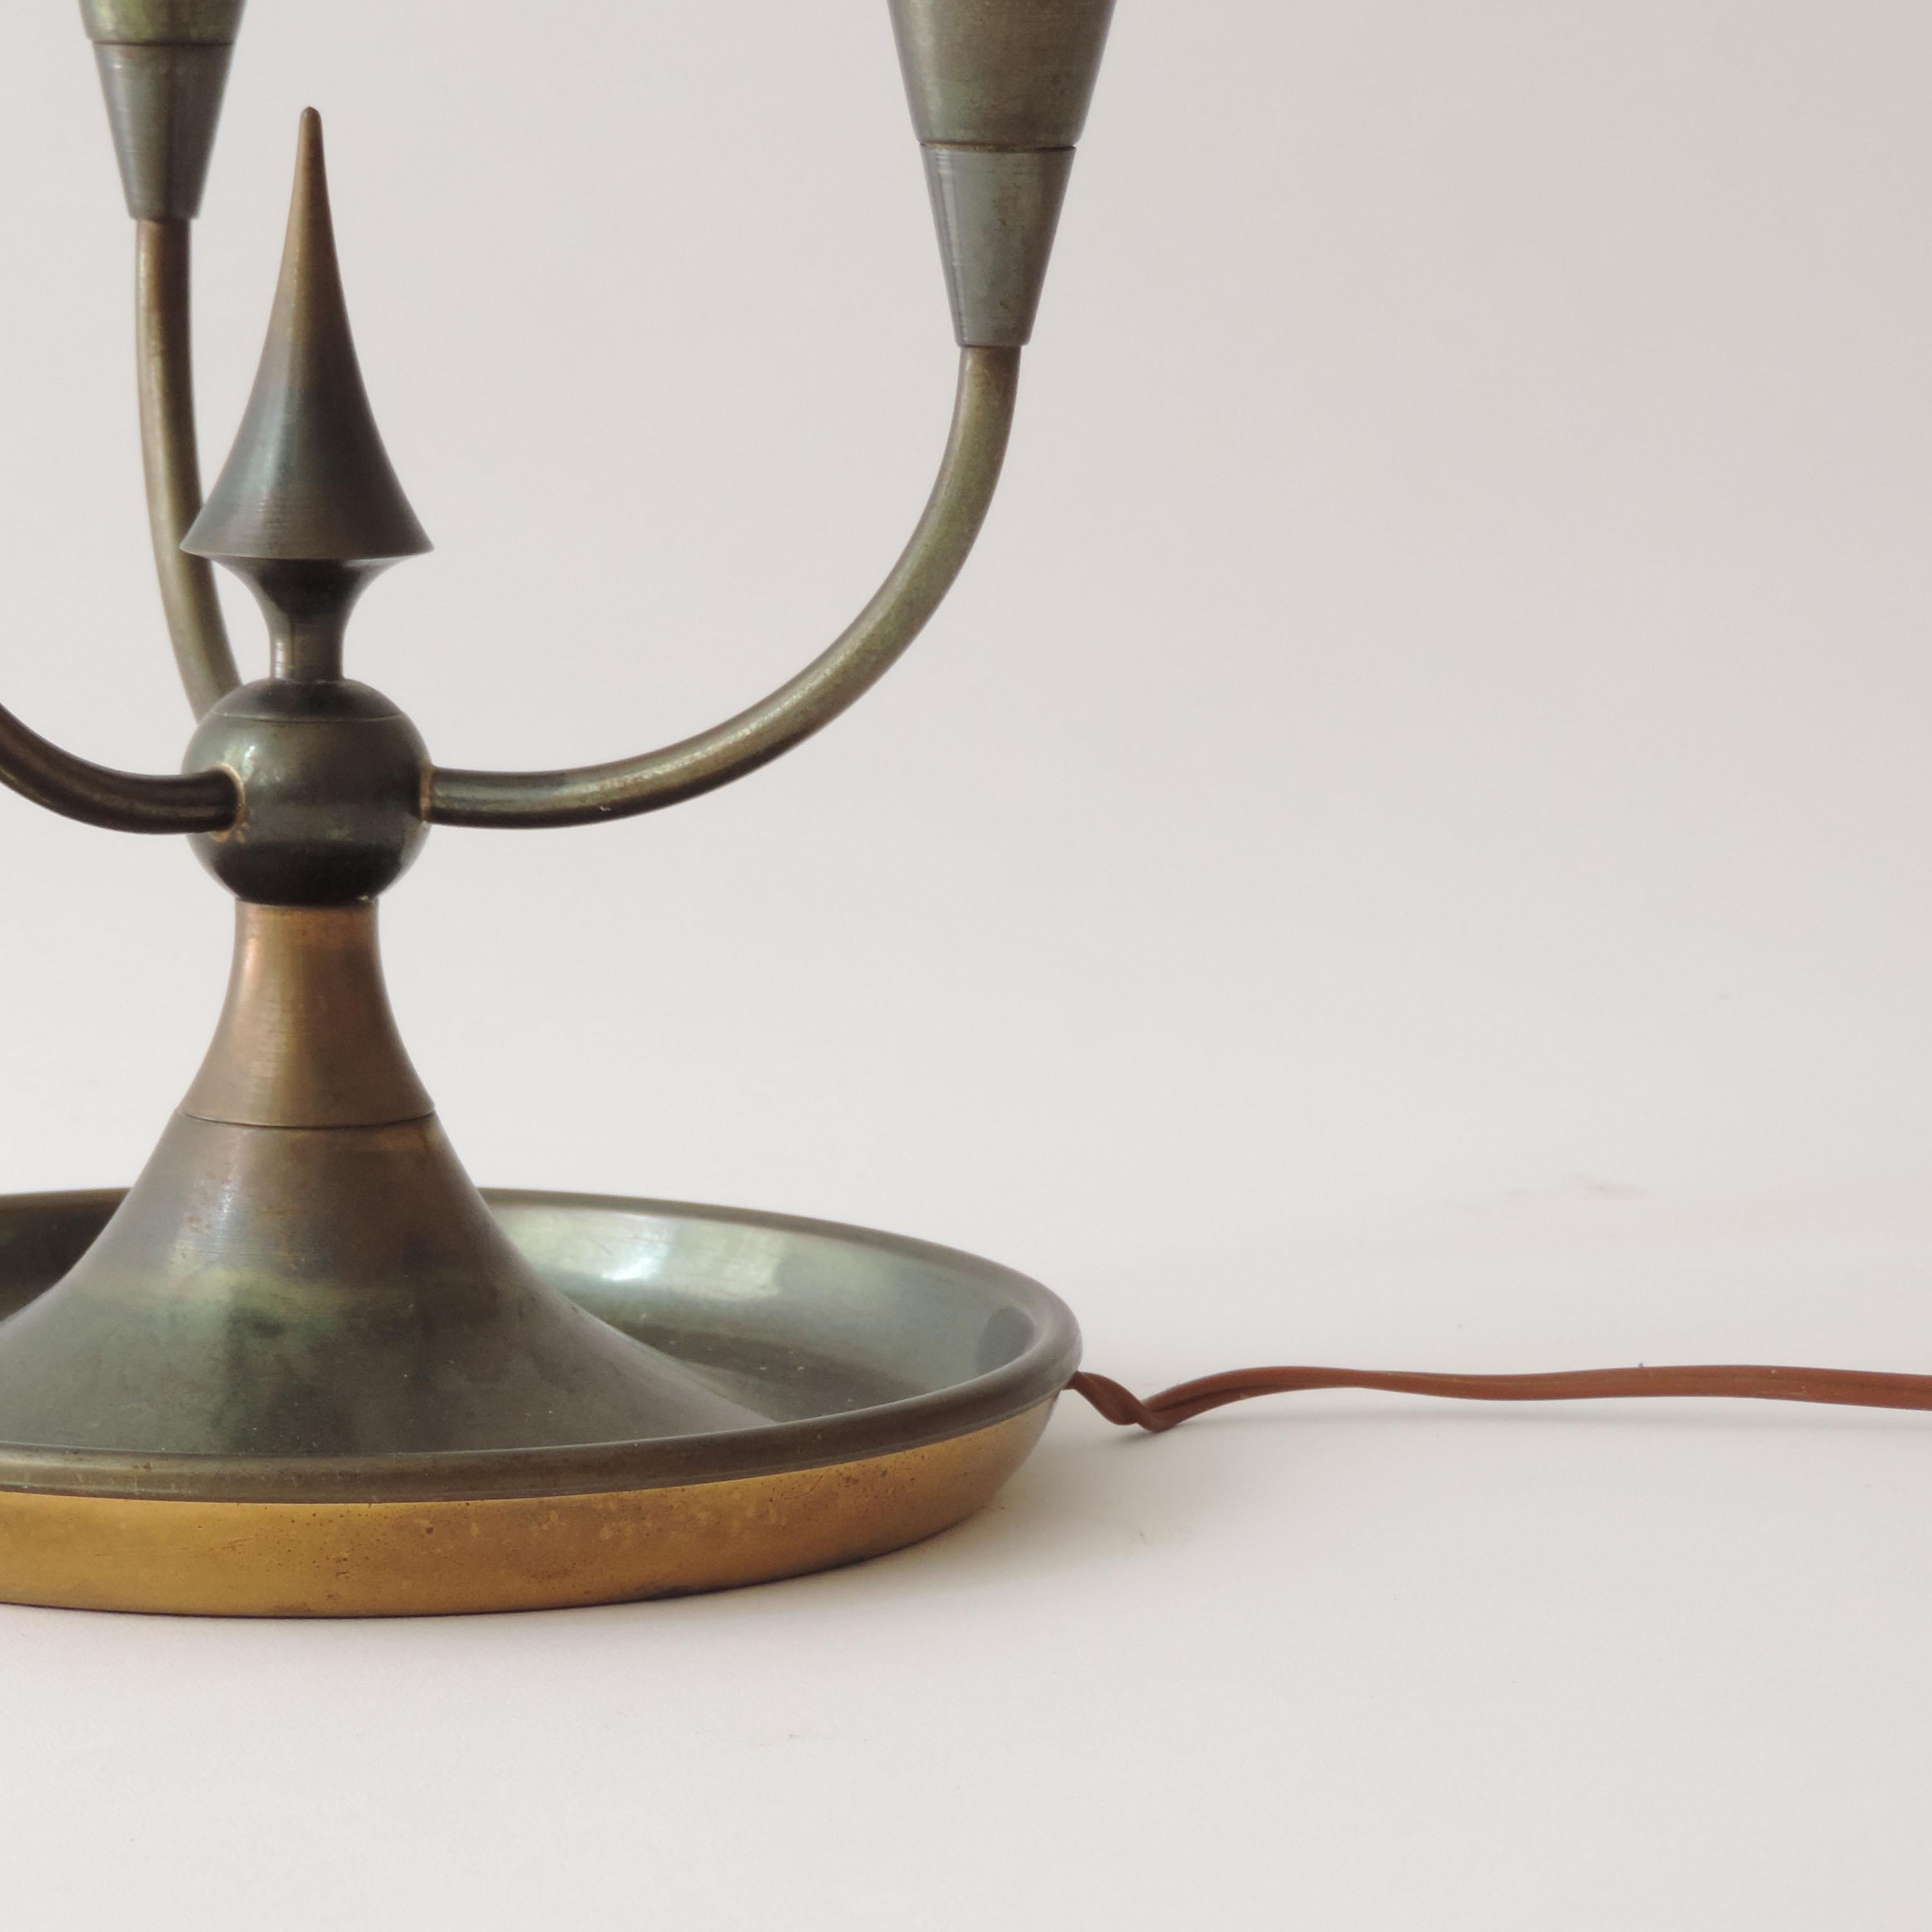 Italian three lights table lamp in brass and glass, Italy, 1940s.